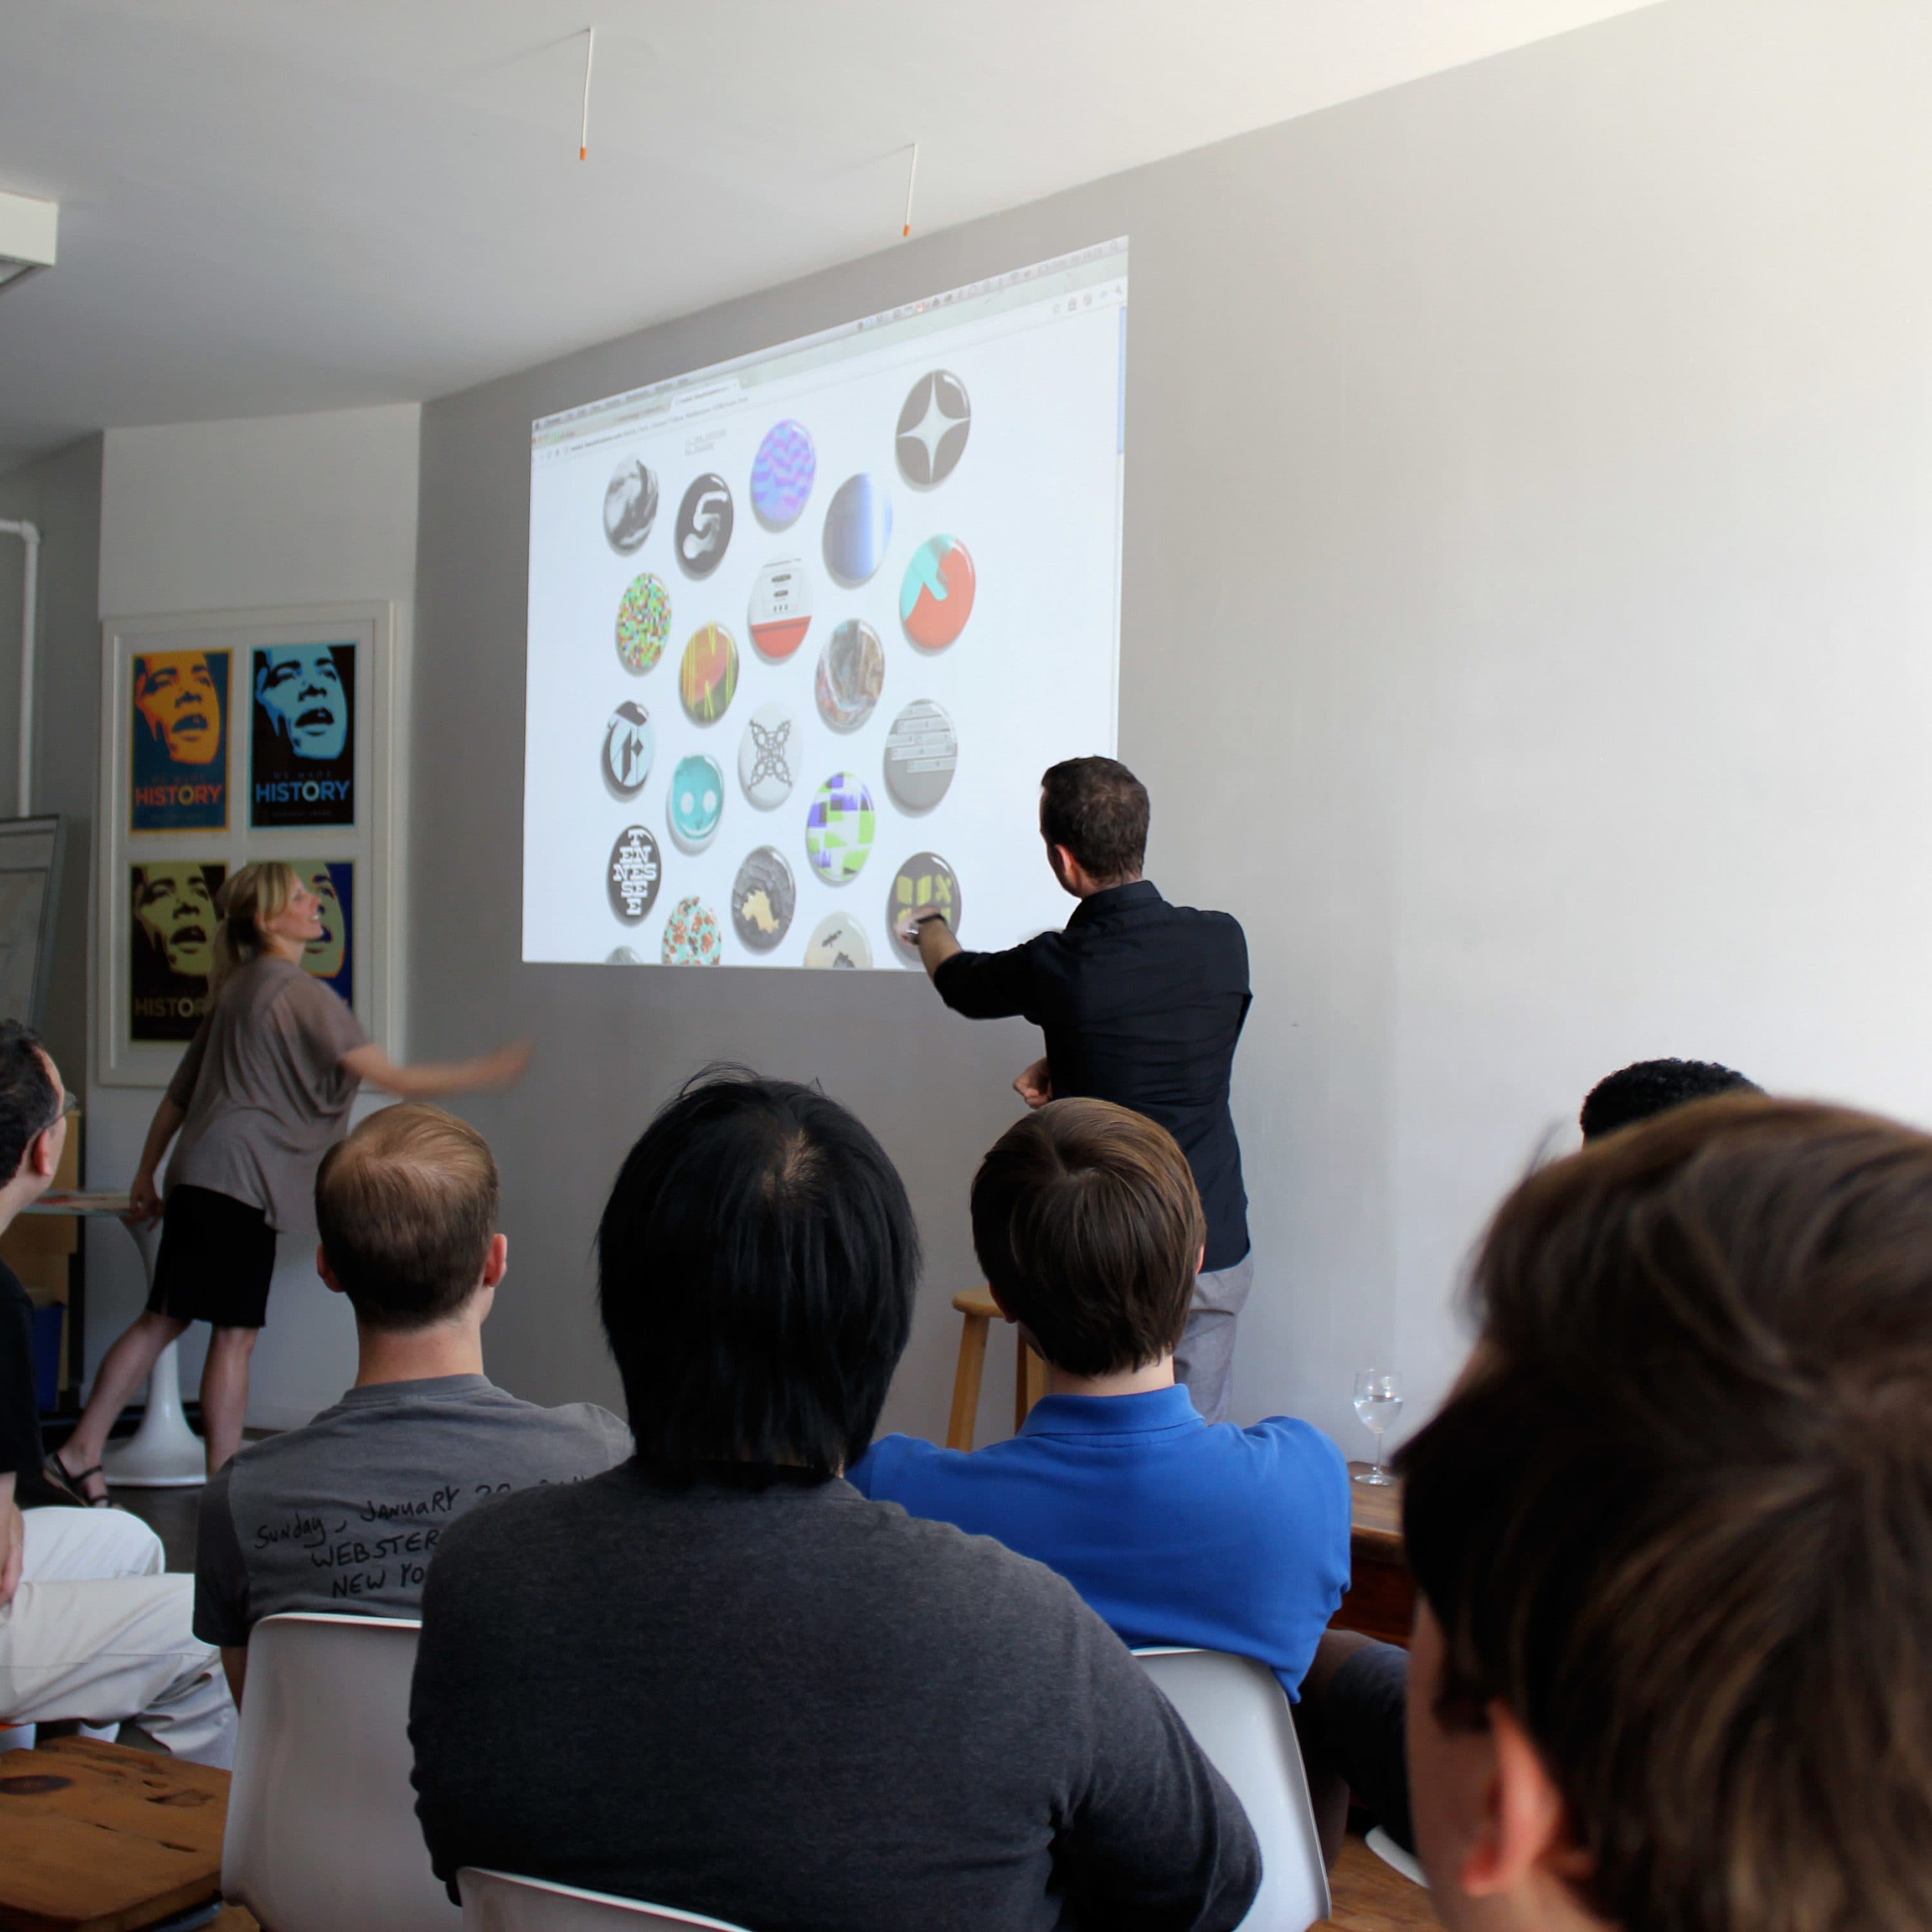 A group of people is seated in a room, attentively watching two individuals at the front who are pointing at a projected screen displaying various circular logos. The room has white walls, posters on the left, and a mix of seating, including chairs and a couch.